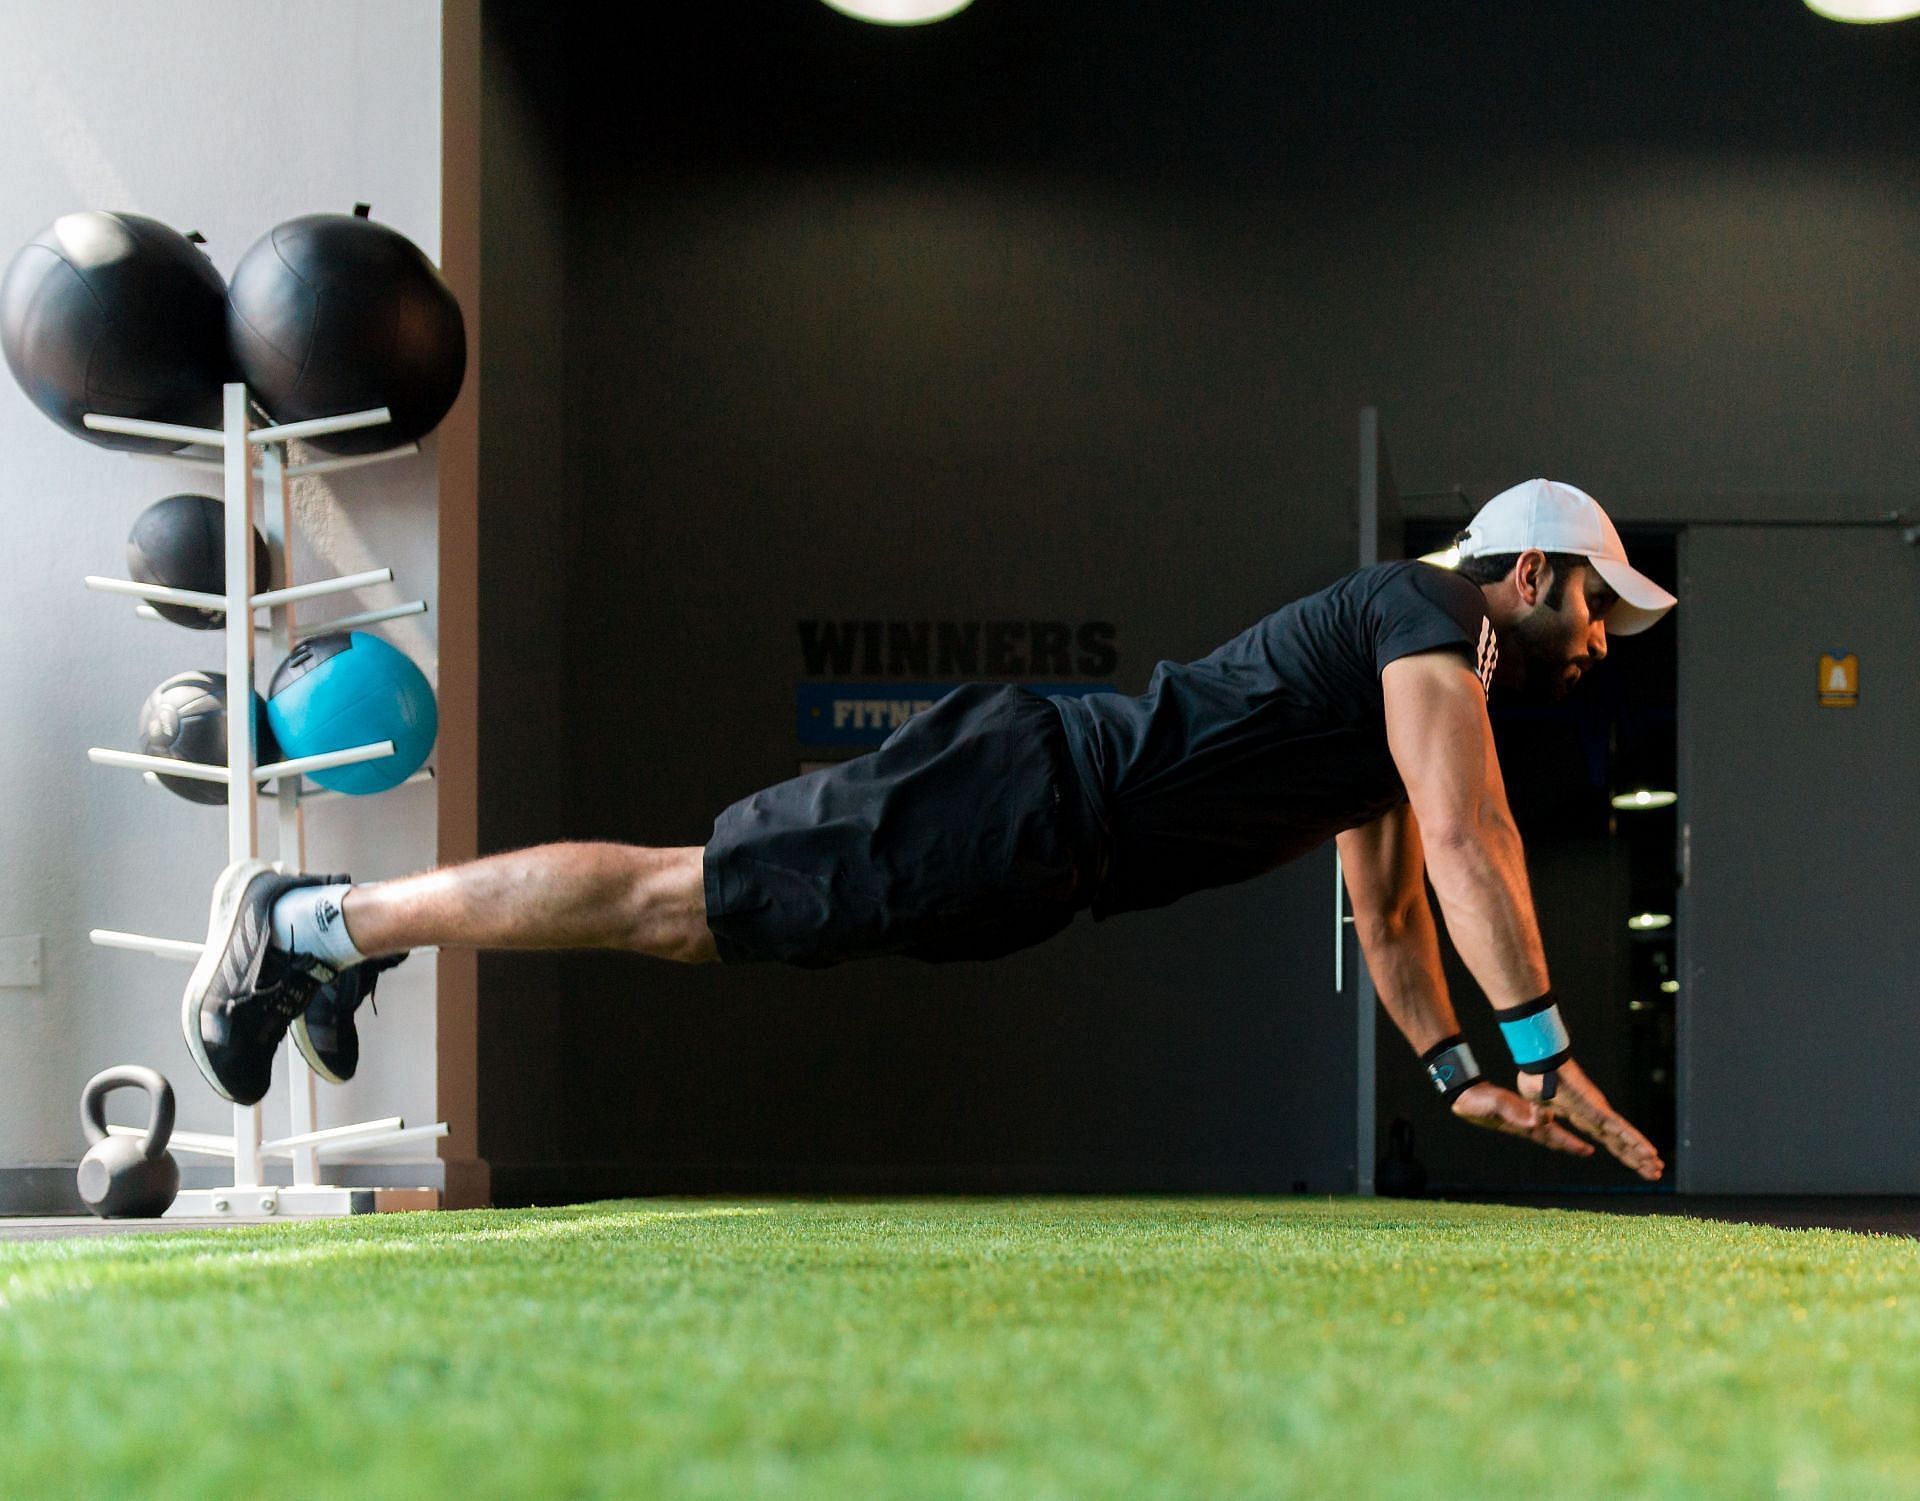 Plyos exercises have a primary emphasis on maximizing muscular power, resulting in amplified strength and explosiveness. (Image via Pexels/Abdulrhman alkady)